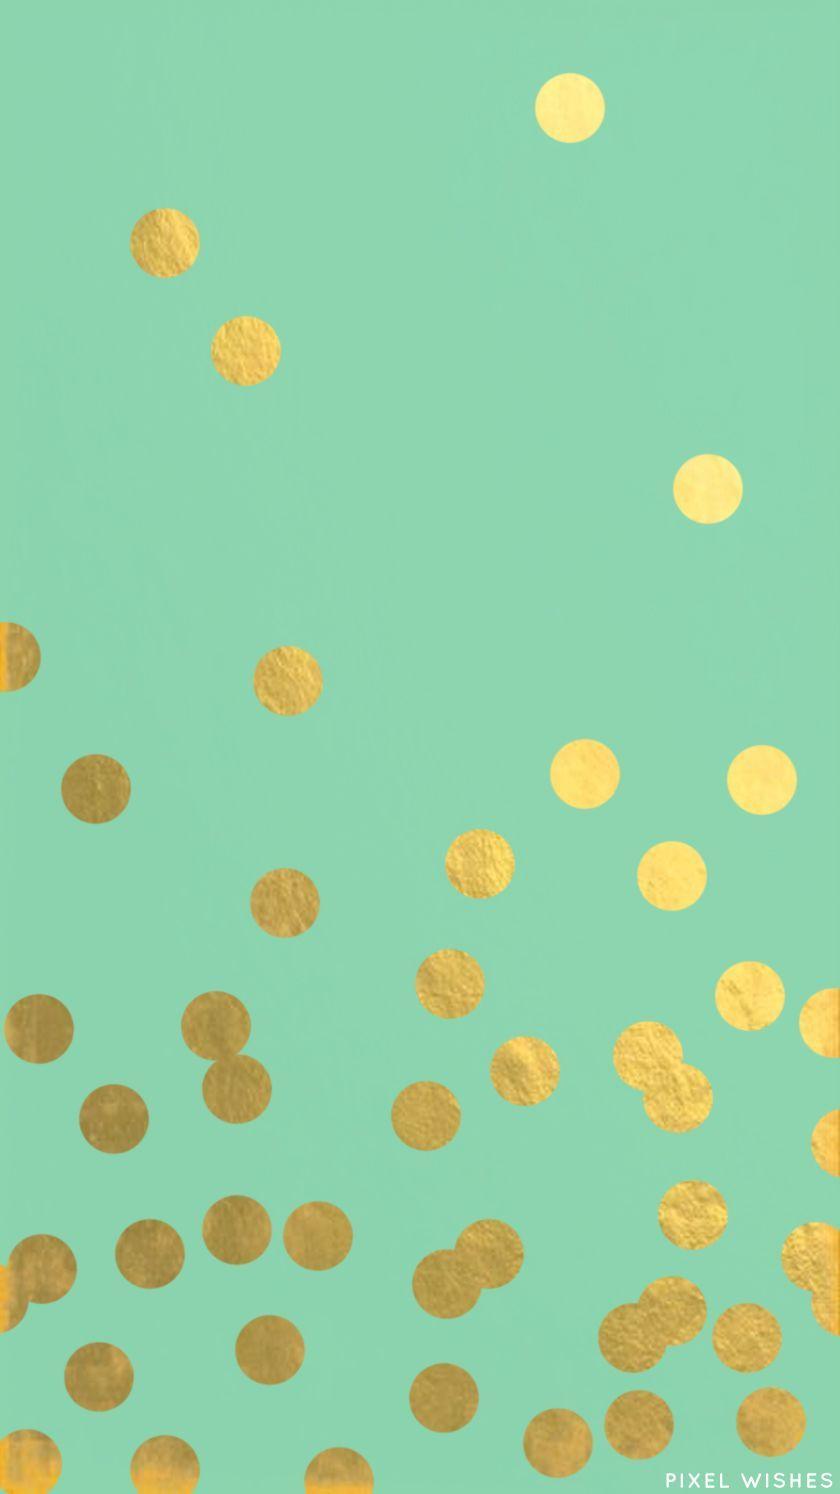 Mint Green iPhone Wallpaper And Gold Background